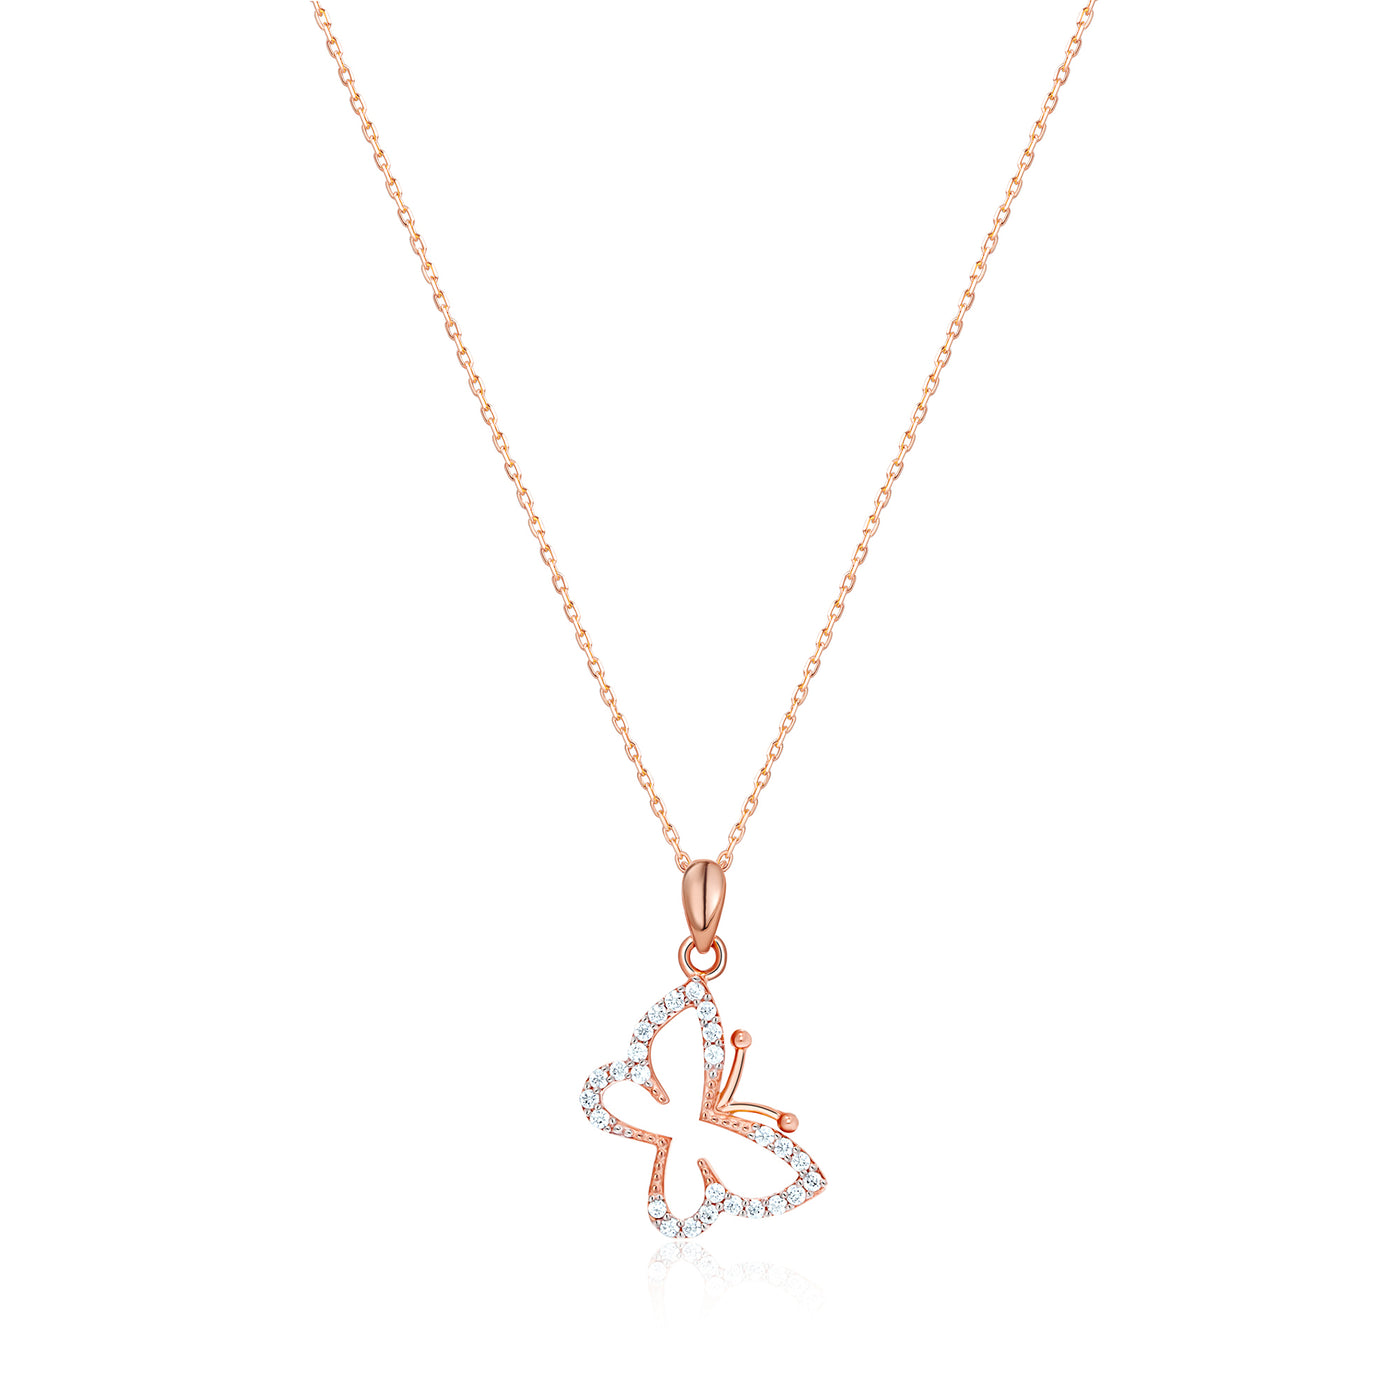 Butterfly Necklace with CZ Diamonds 14K 8K and Silver